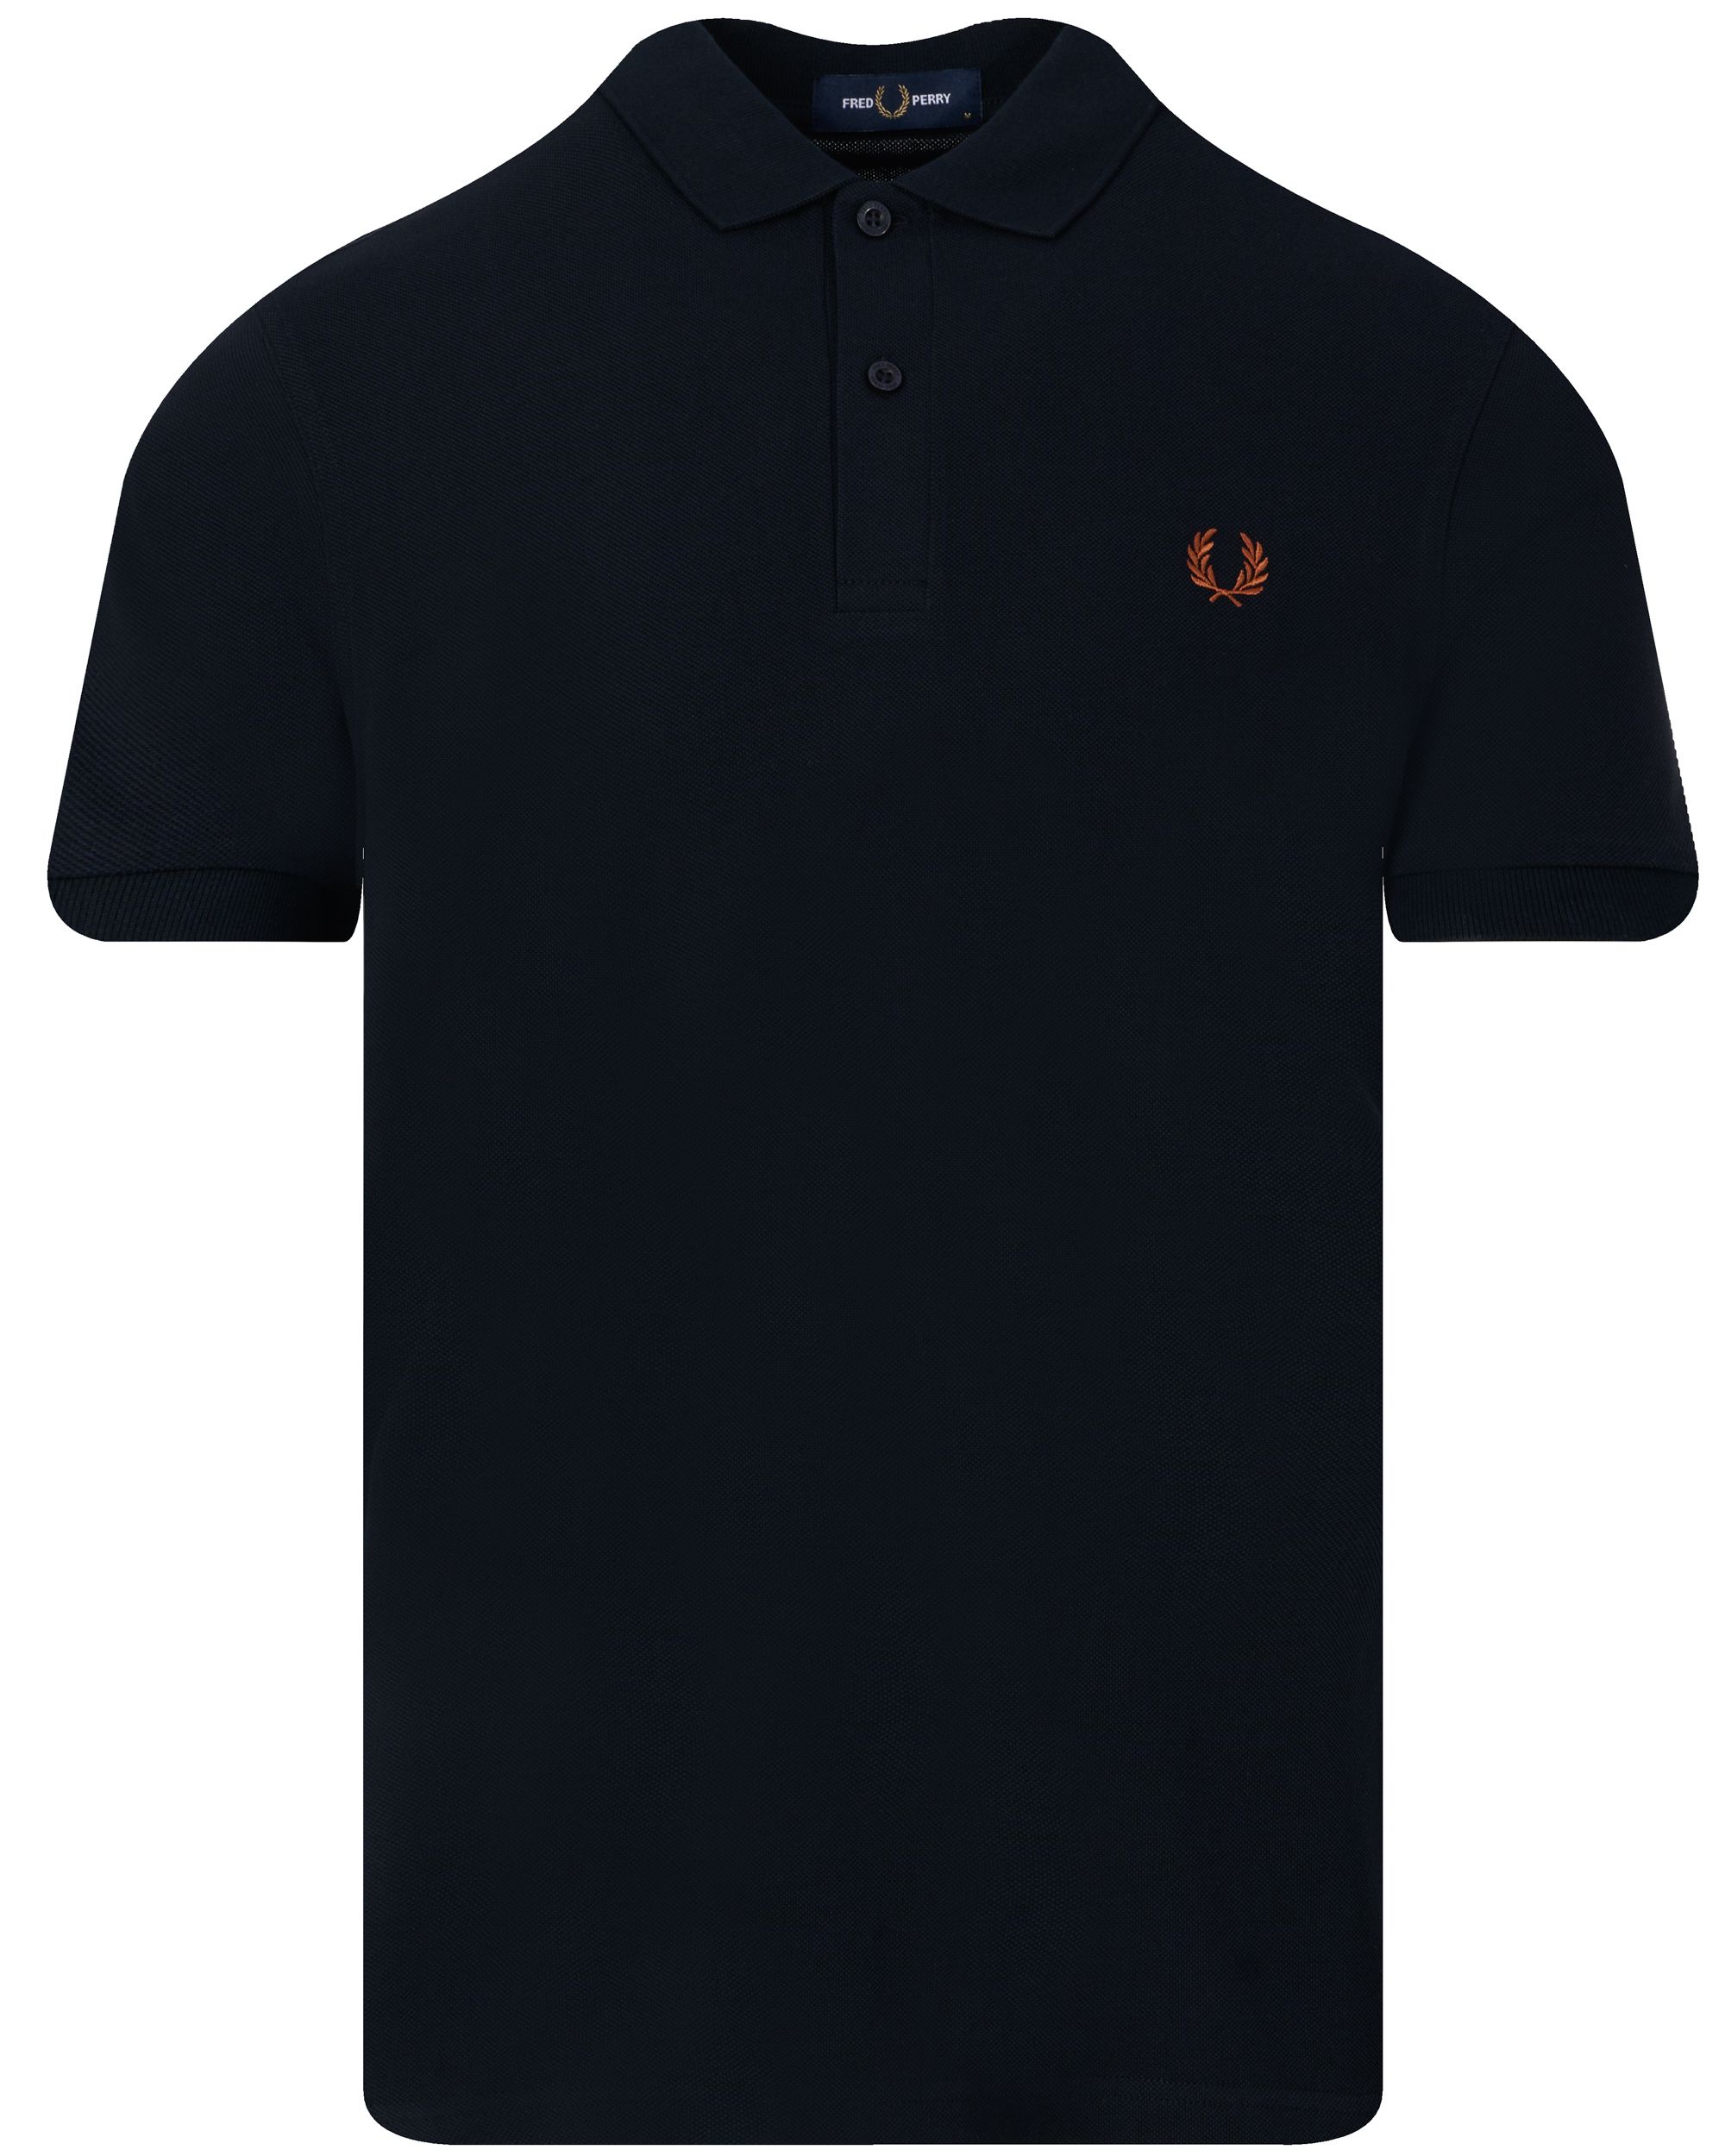 Fred Perry Polo KM Donker blauw 095674-001-L